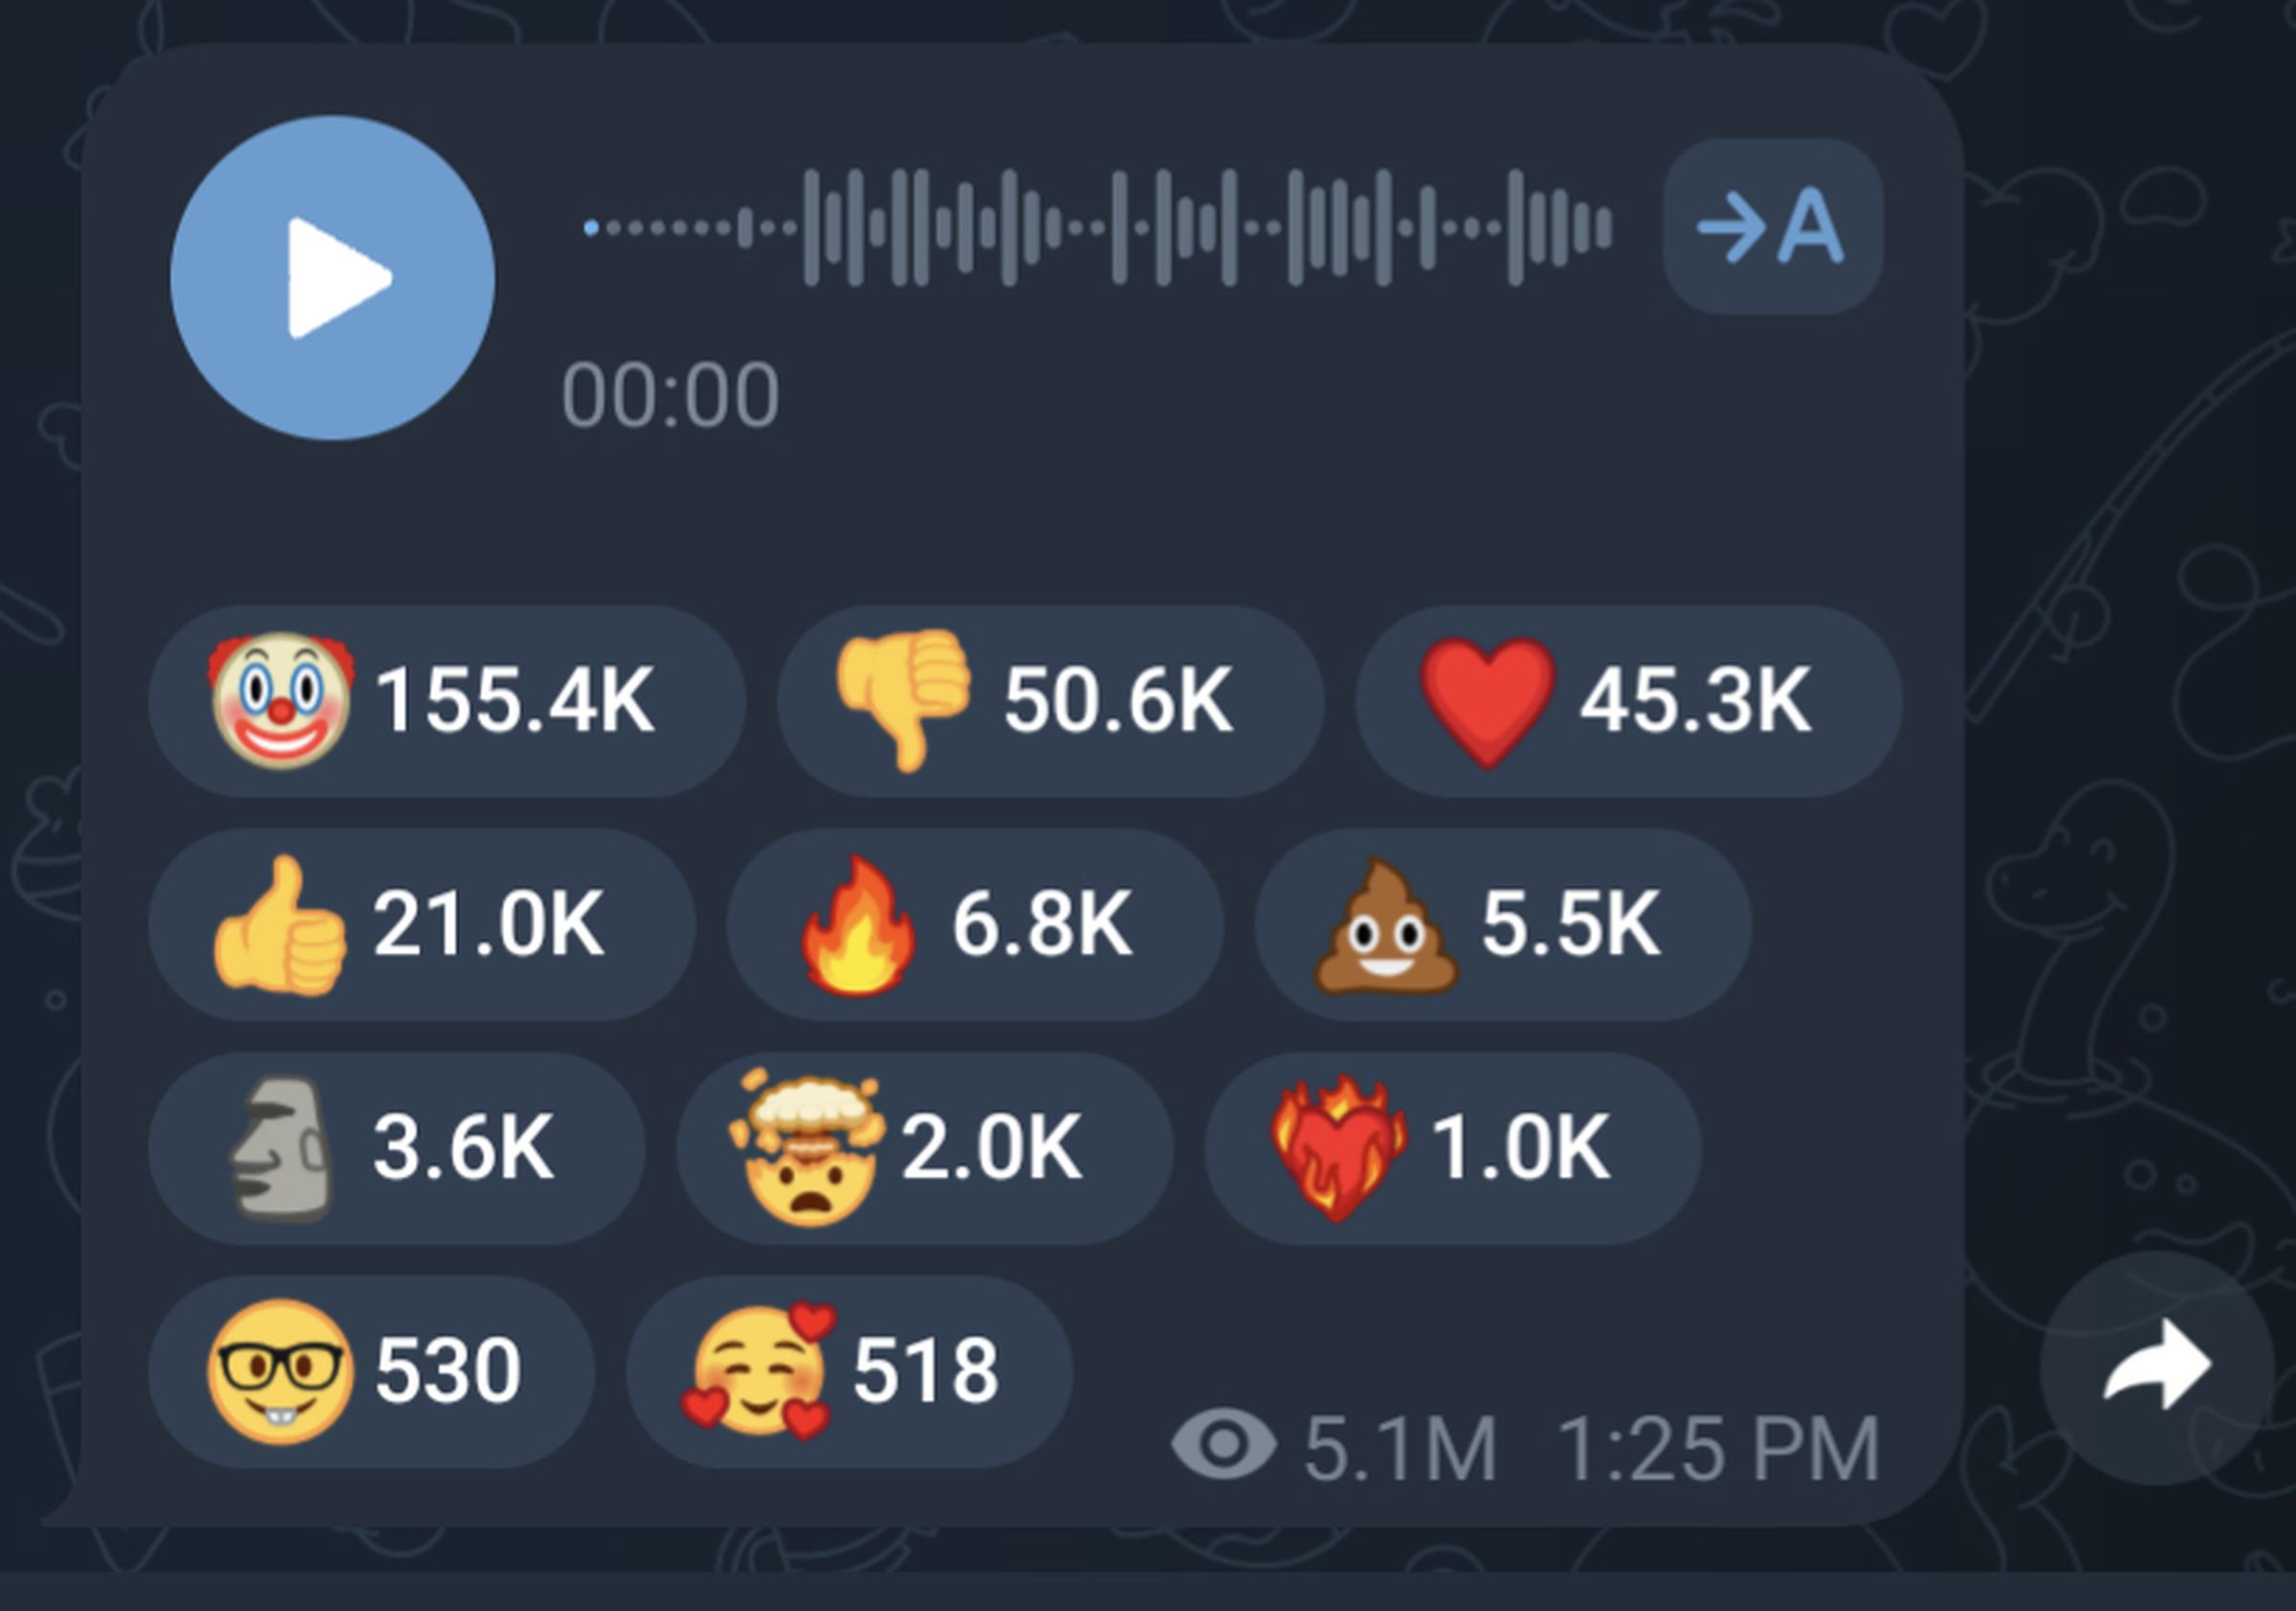 Screenshot of an audio post in a telegram channel, shows over 150,000 reactions using a clown emoji, 50,000 thumbs down reactions, and 21,000 thumbs up.